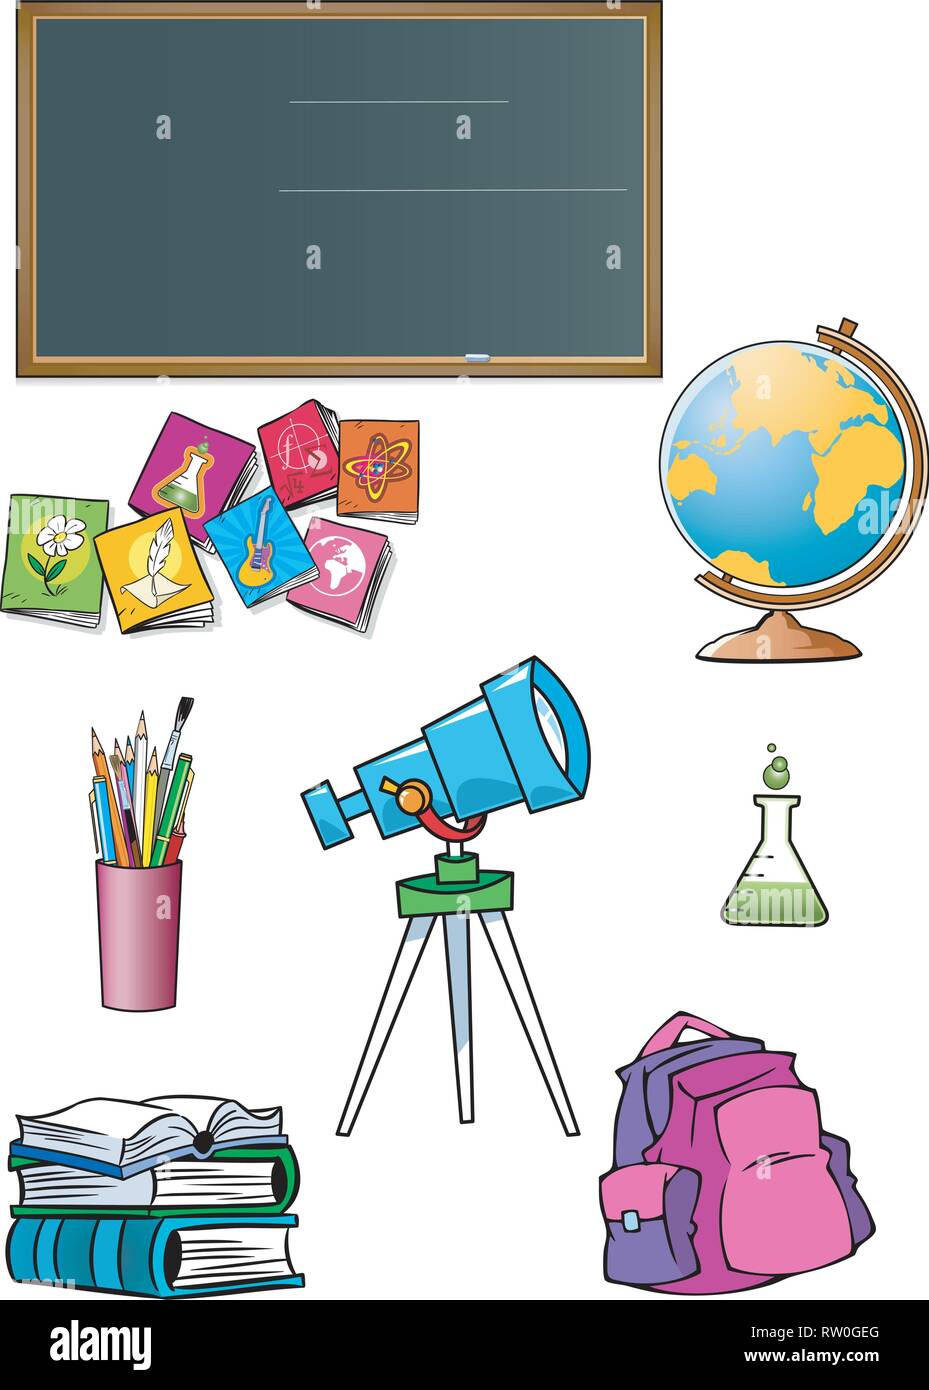 The illustration shows a group of school subjects and attributes of the classroom. Illustration done on separate layers, isolated on white background. Stock Vector